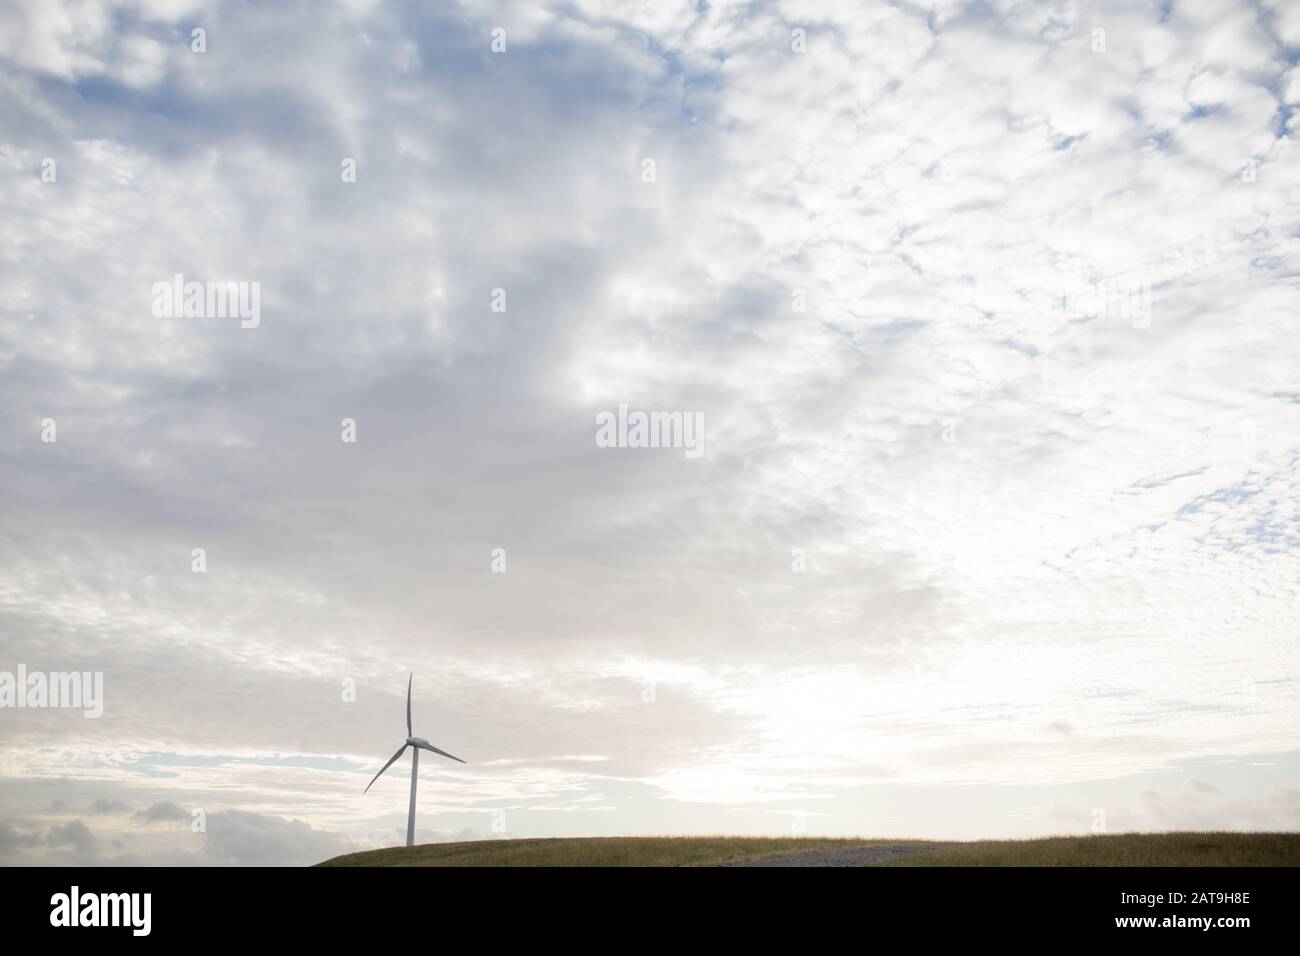 a wind turbine used in energy production on a hill with setting sun behind Stock Photo